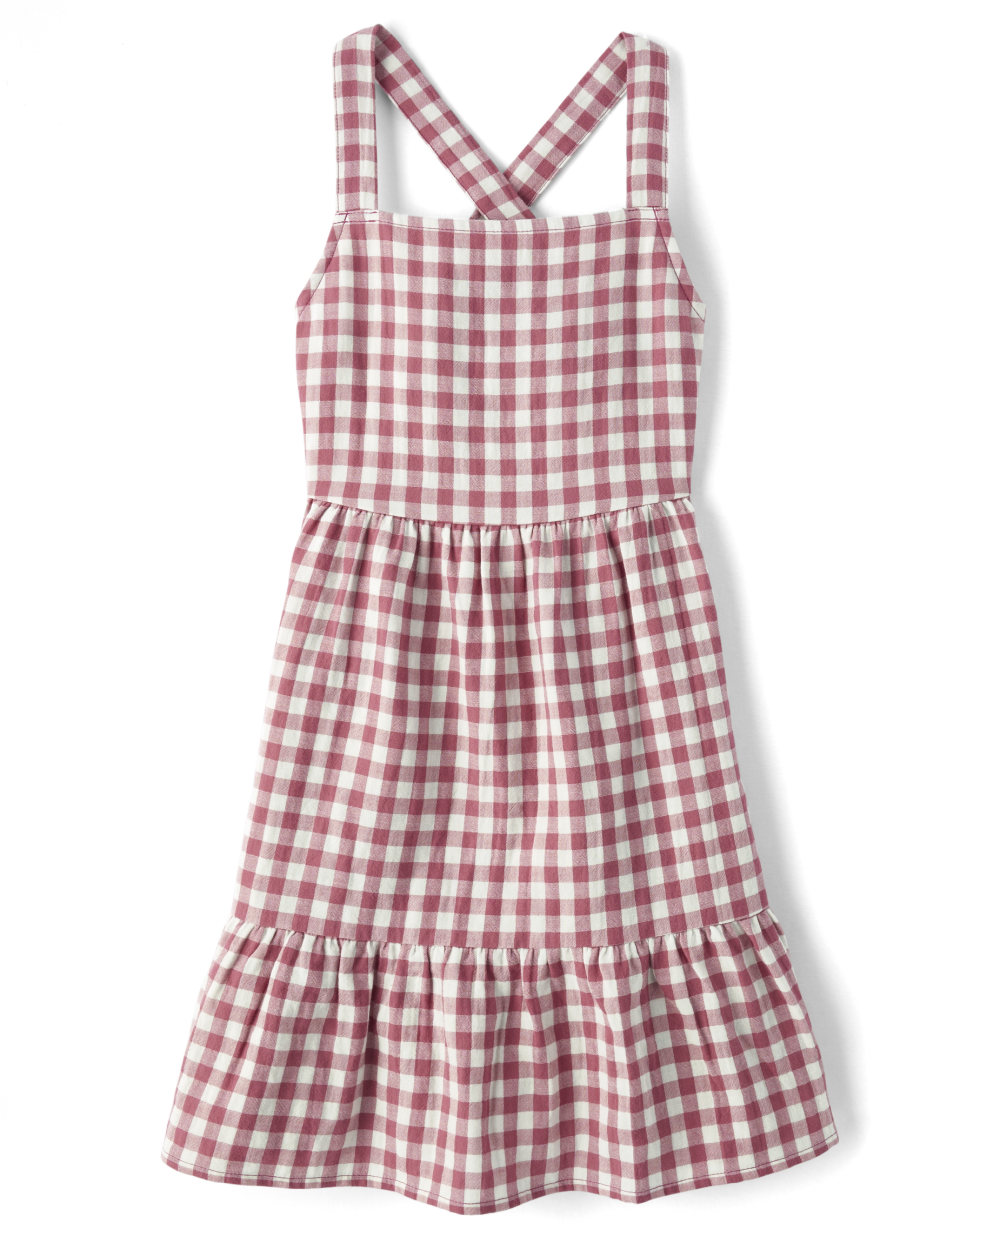 Girls Above the Knee Square Neck Sleeveless Checkered Gingham Print Dress With Ruffles